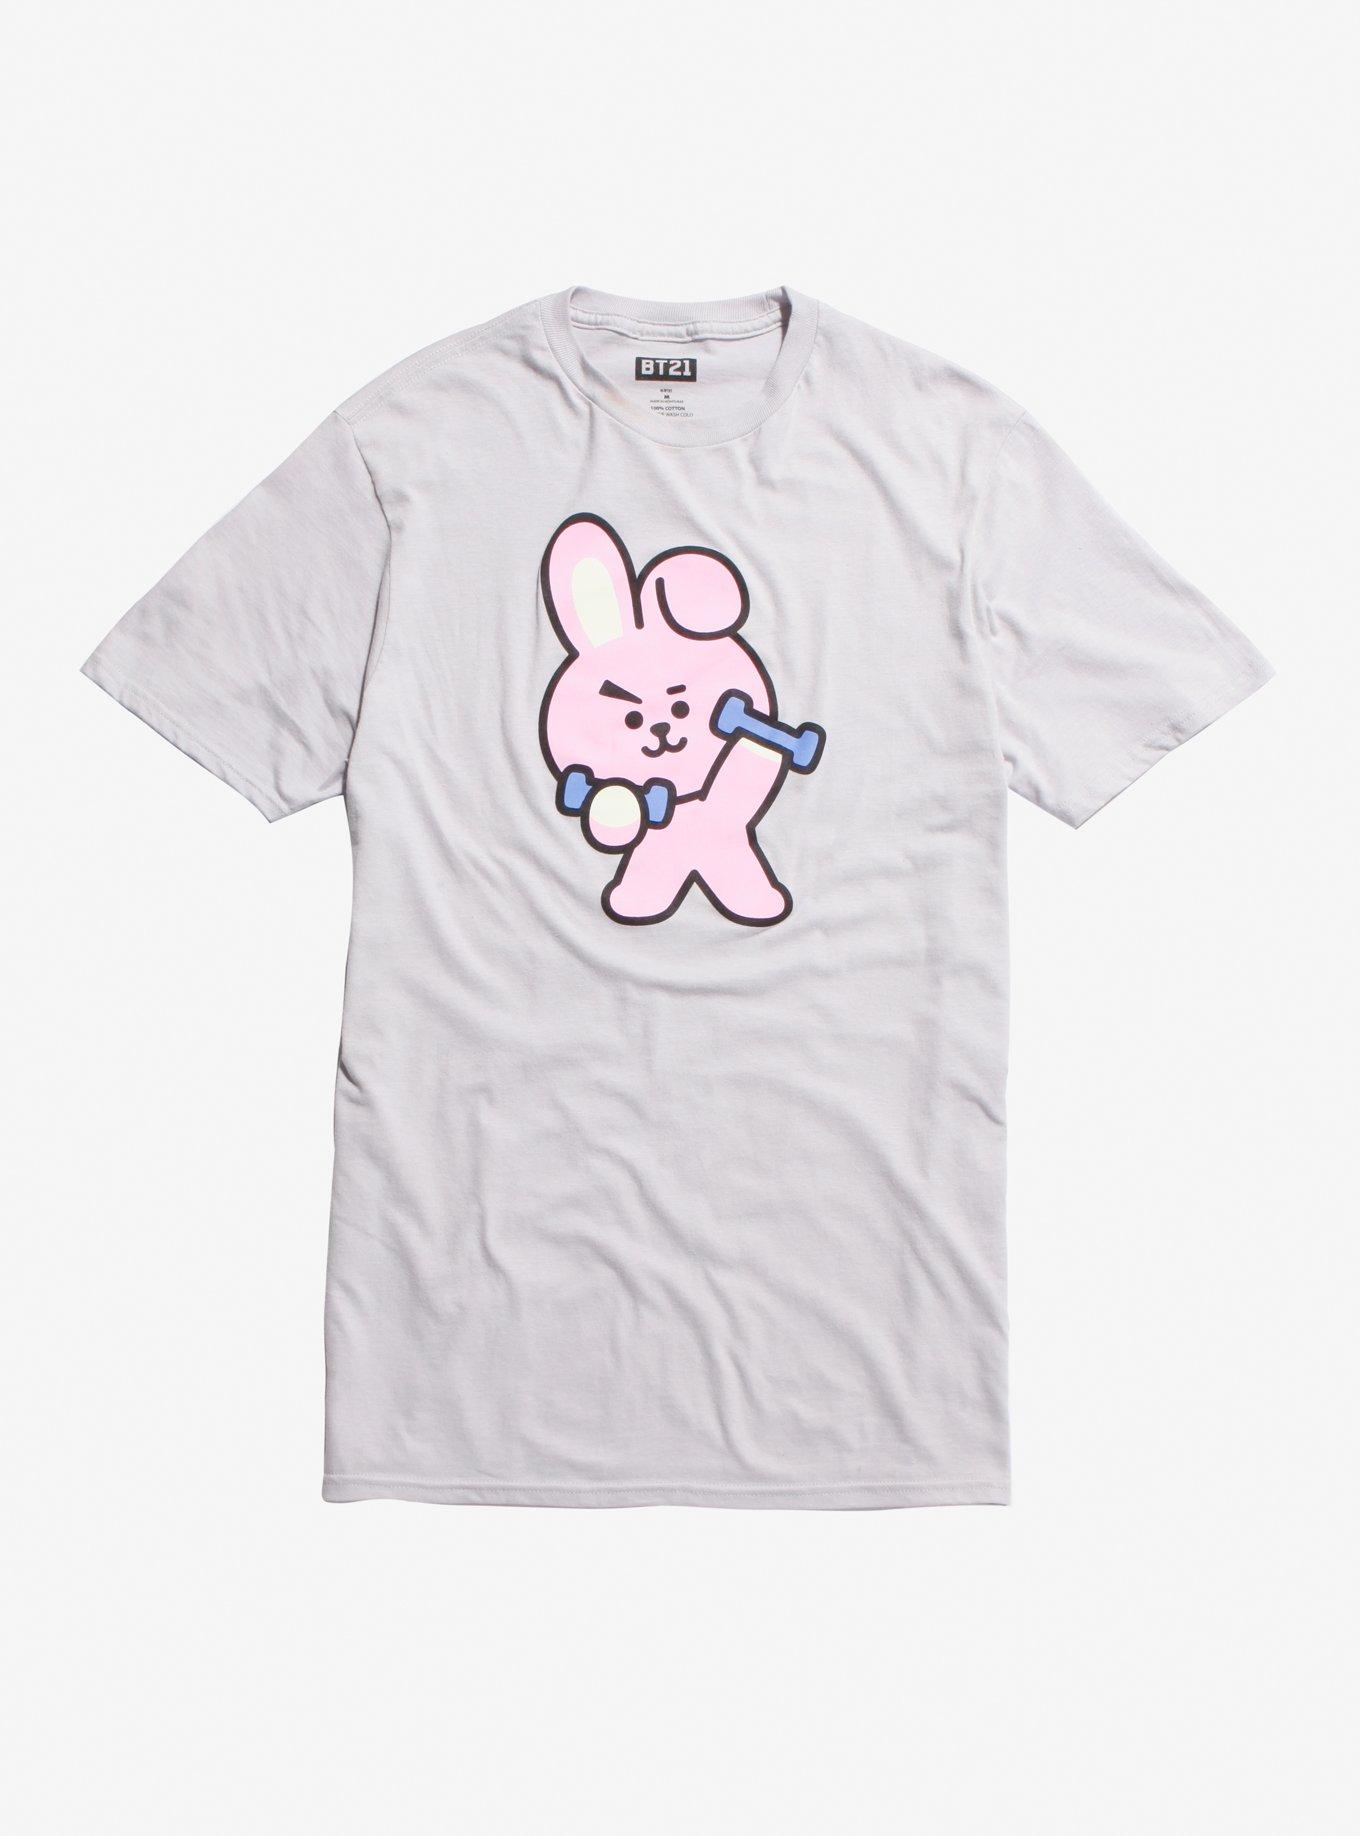 BT21 Strong Cooky T-Shirt, MULTI, hi-res